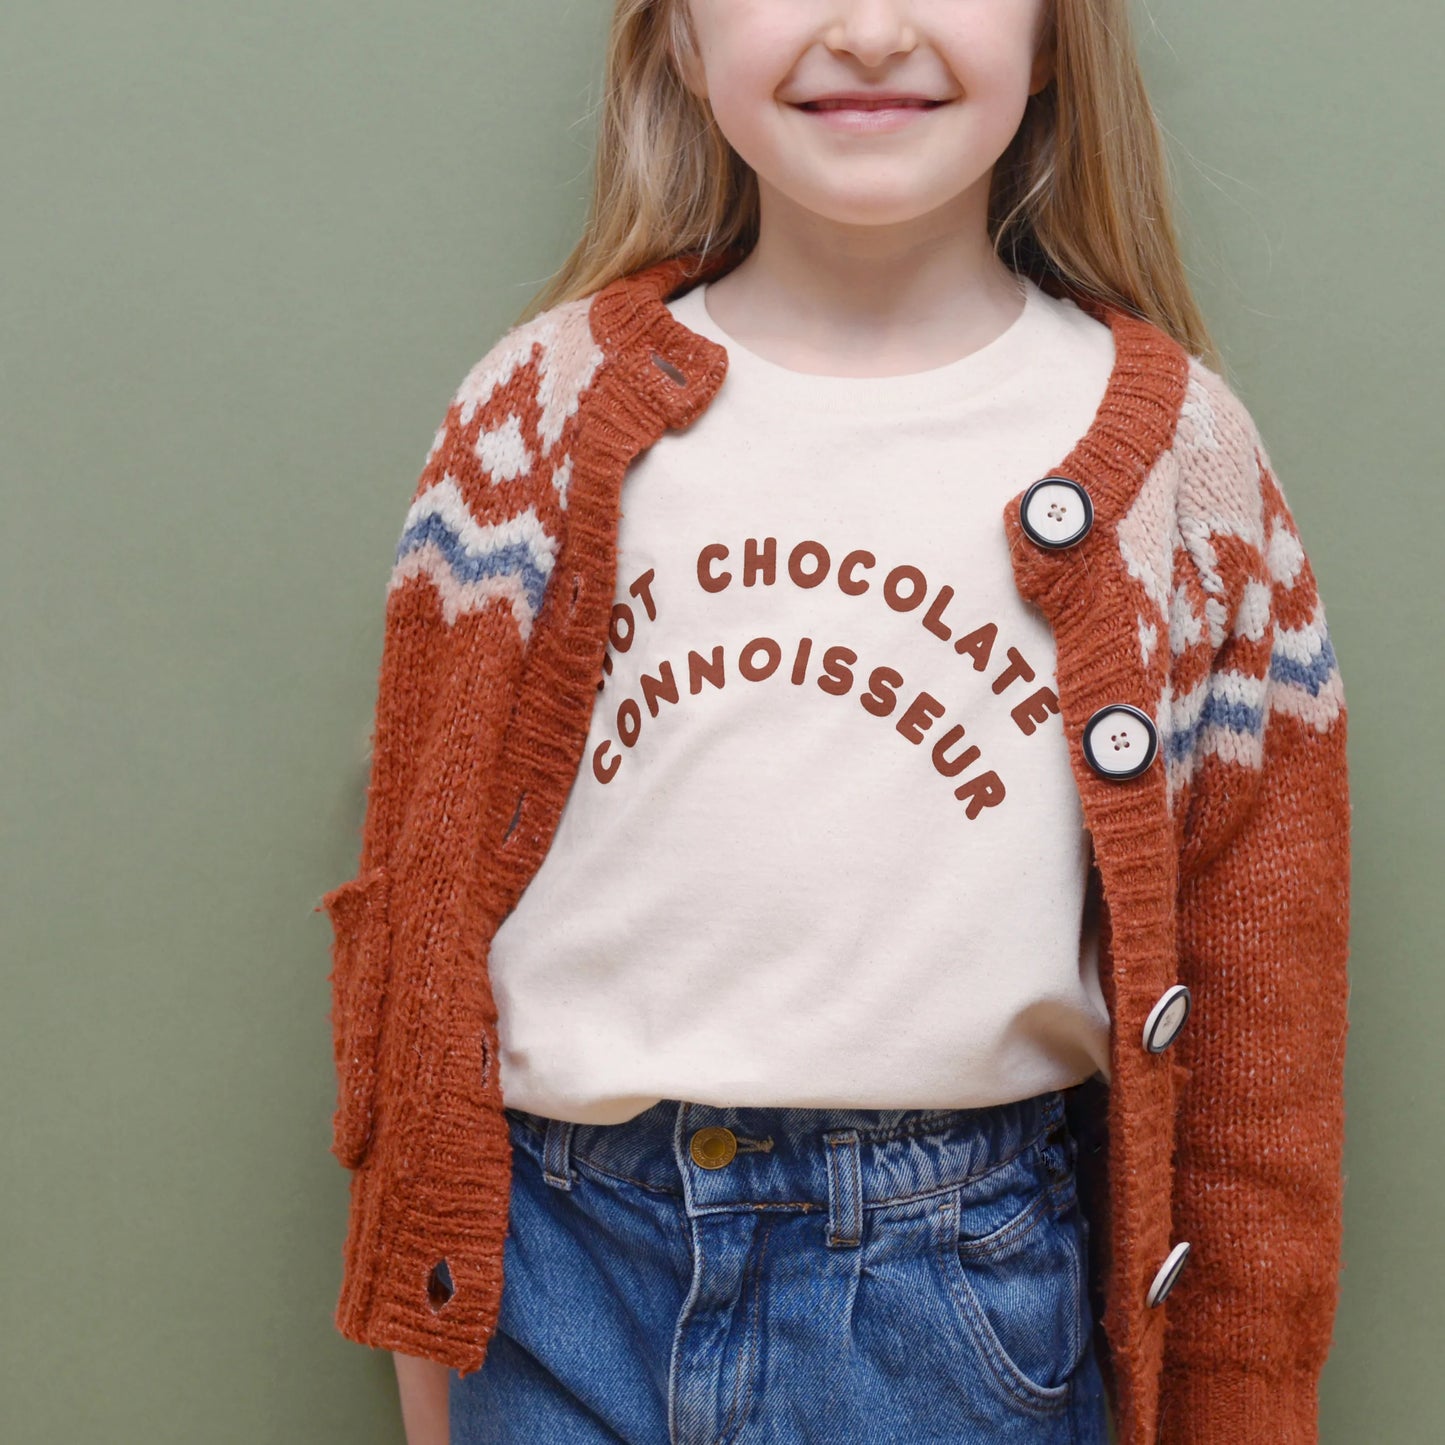 hot chocolate connoisseur tee at whippersnappersonline